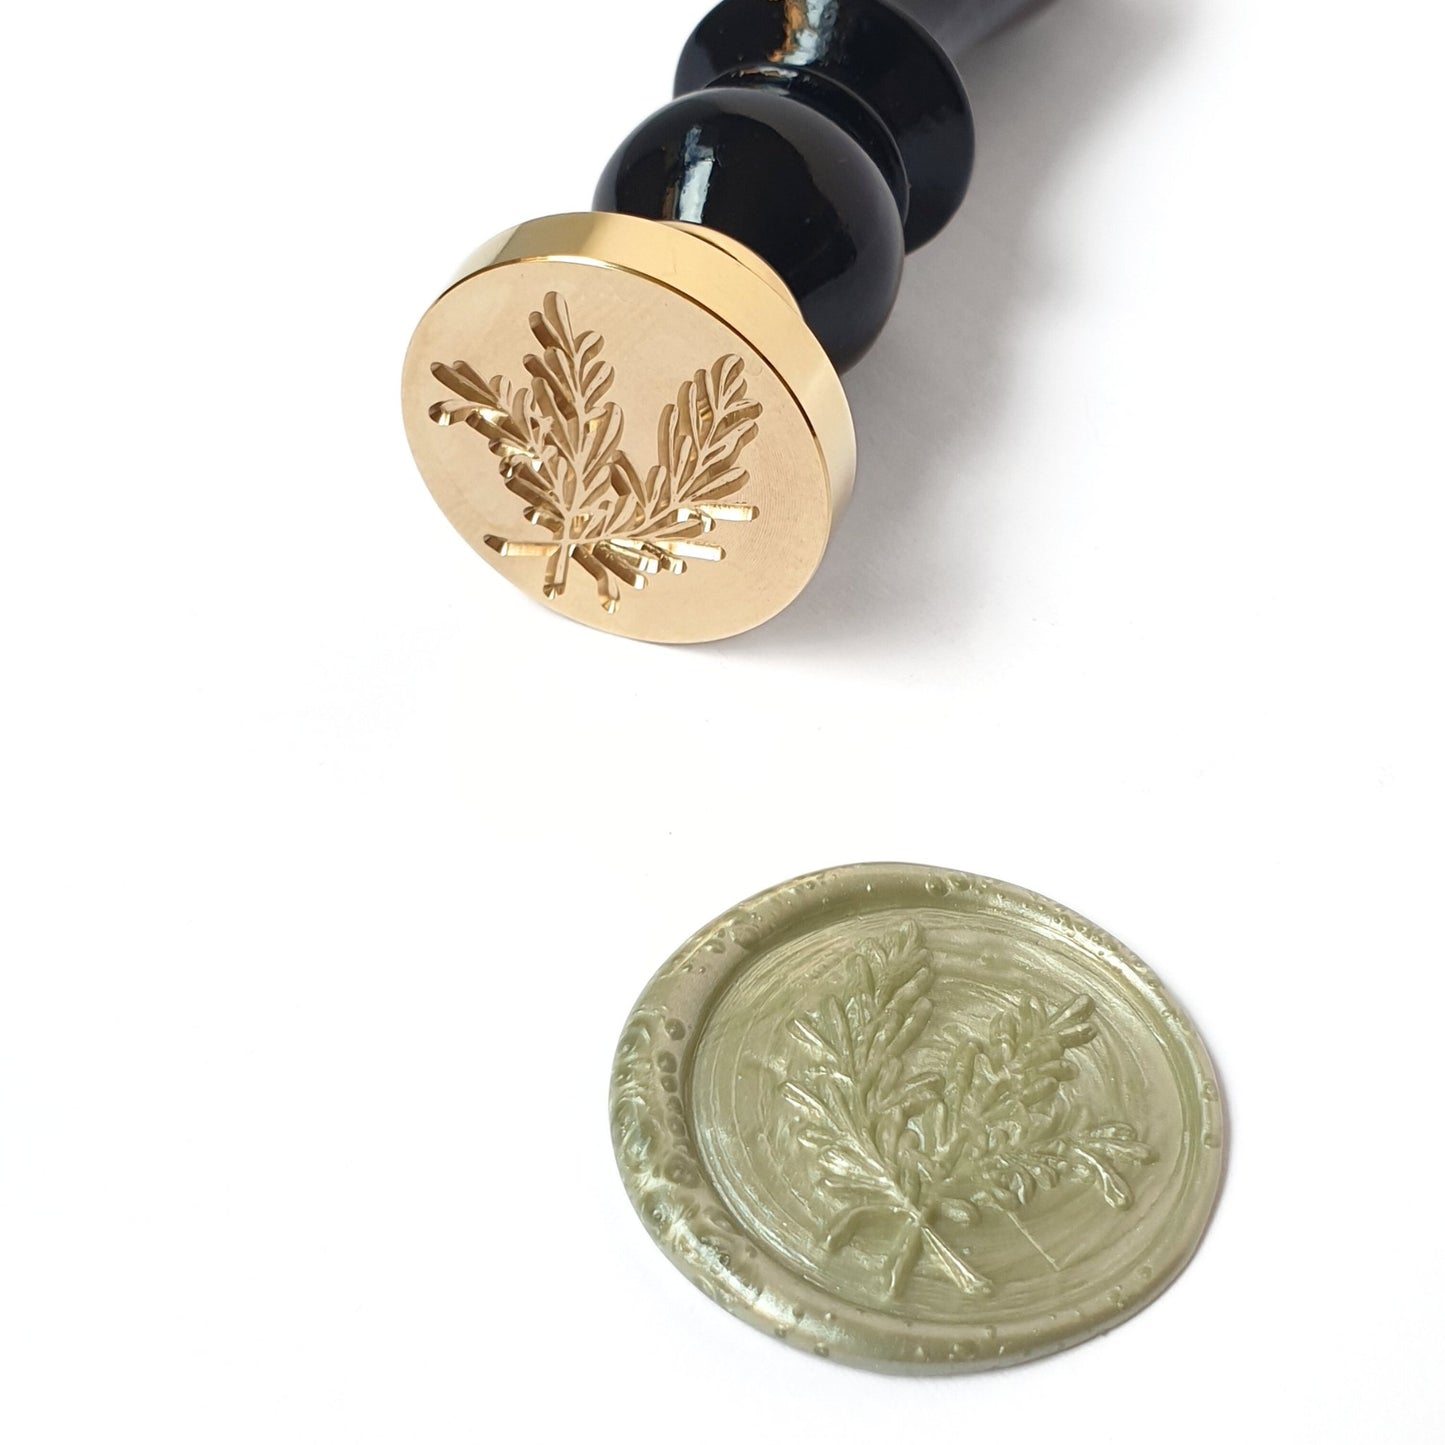 Wild rosemary engraved brass wax seal with black wooden handle